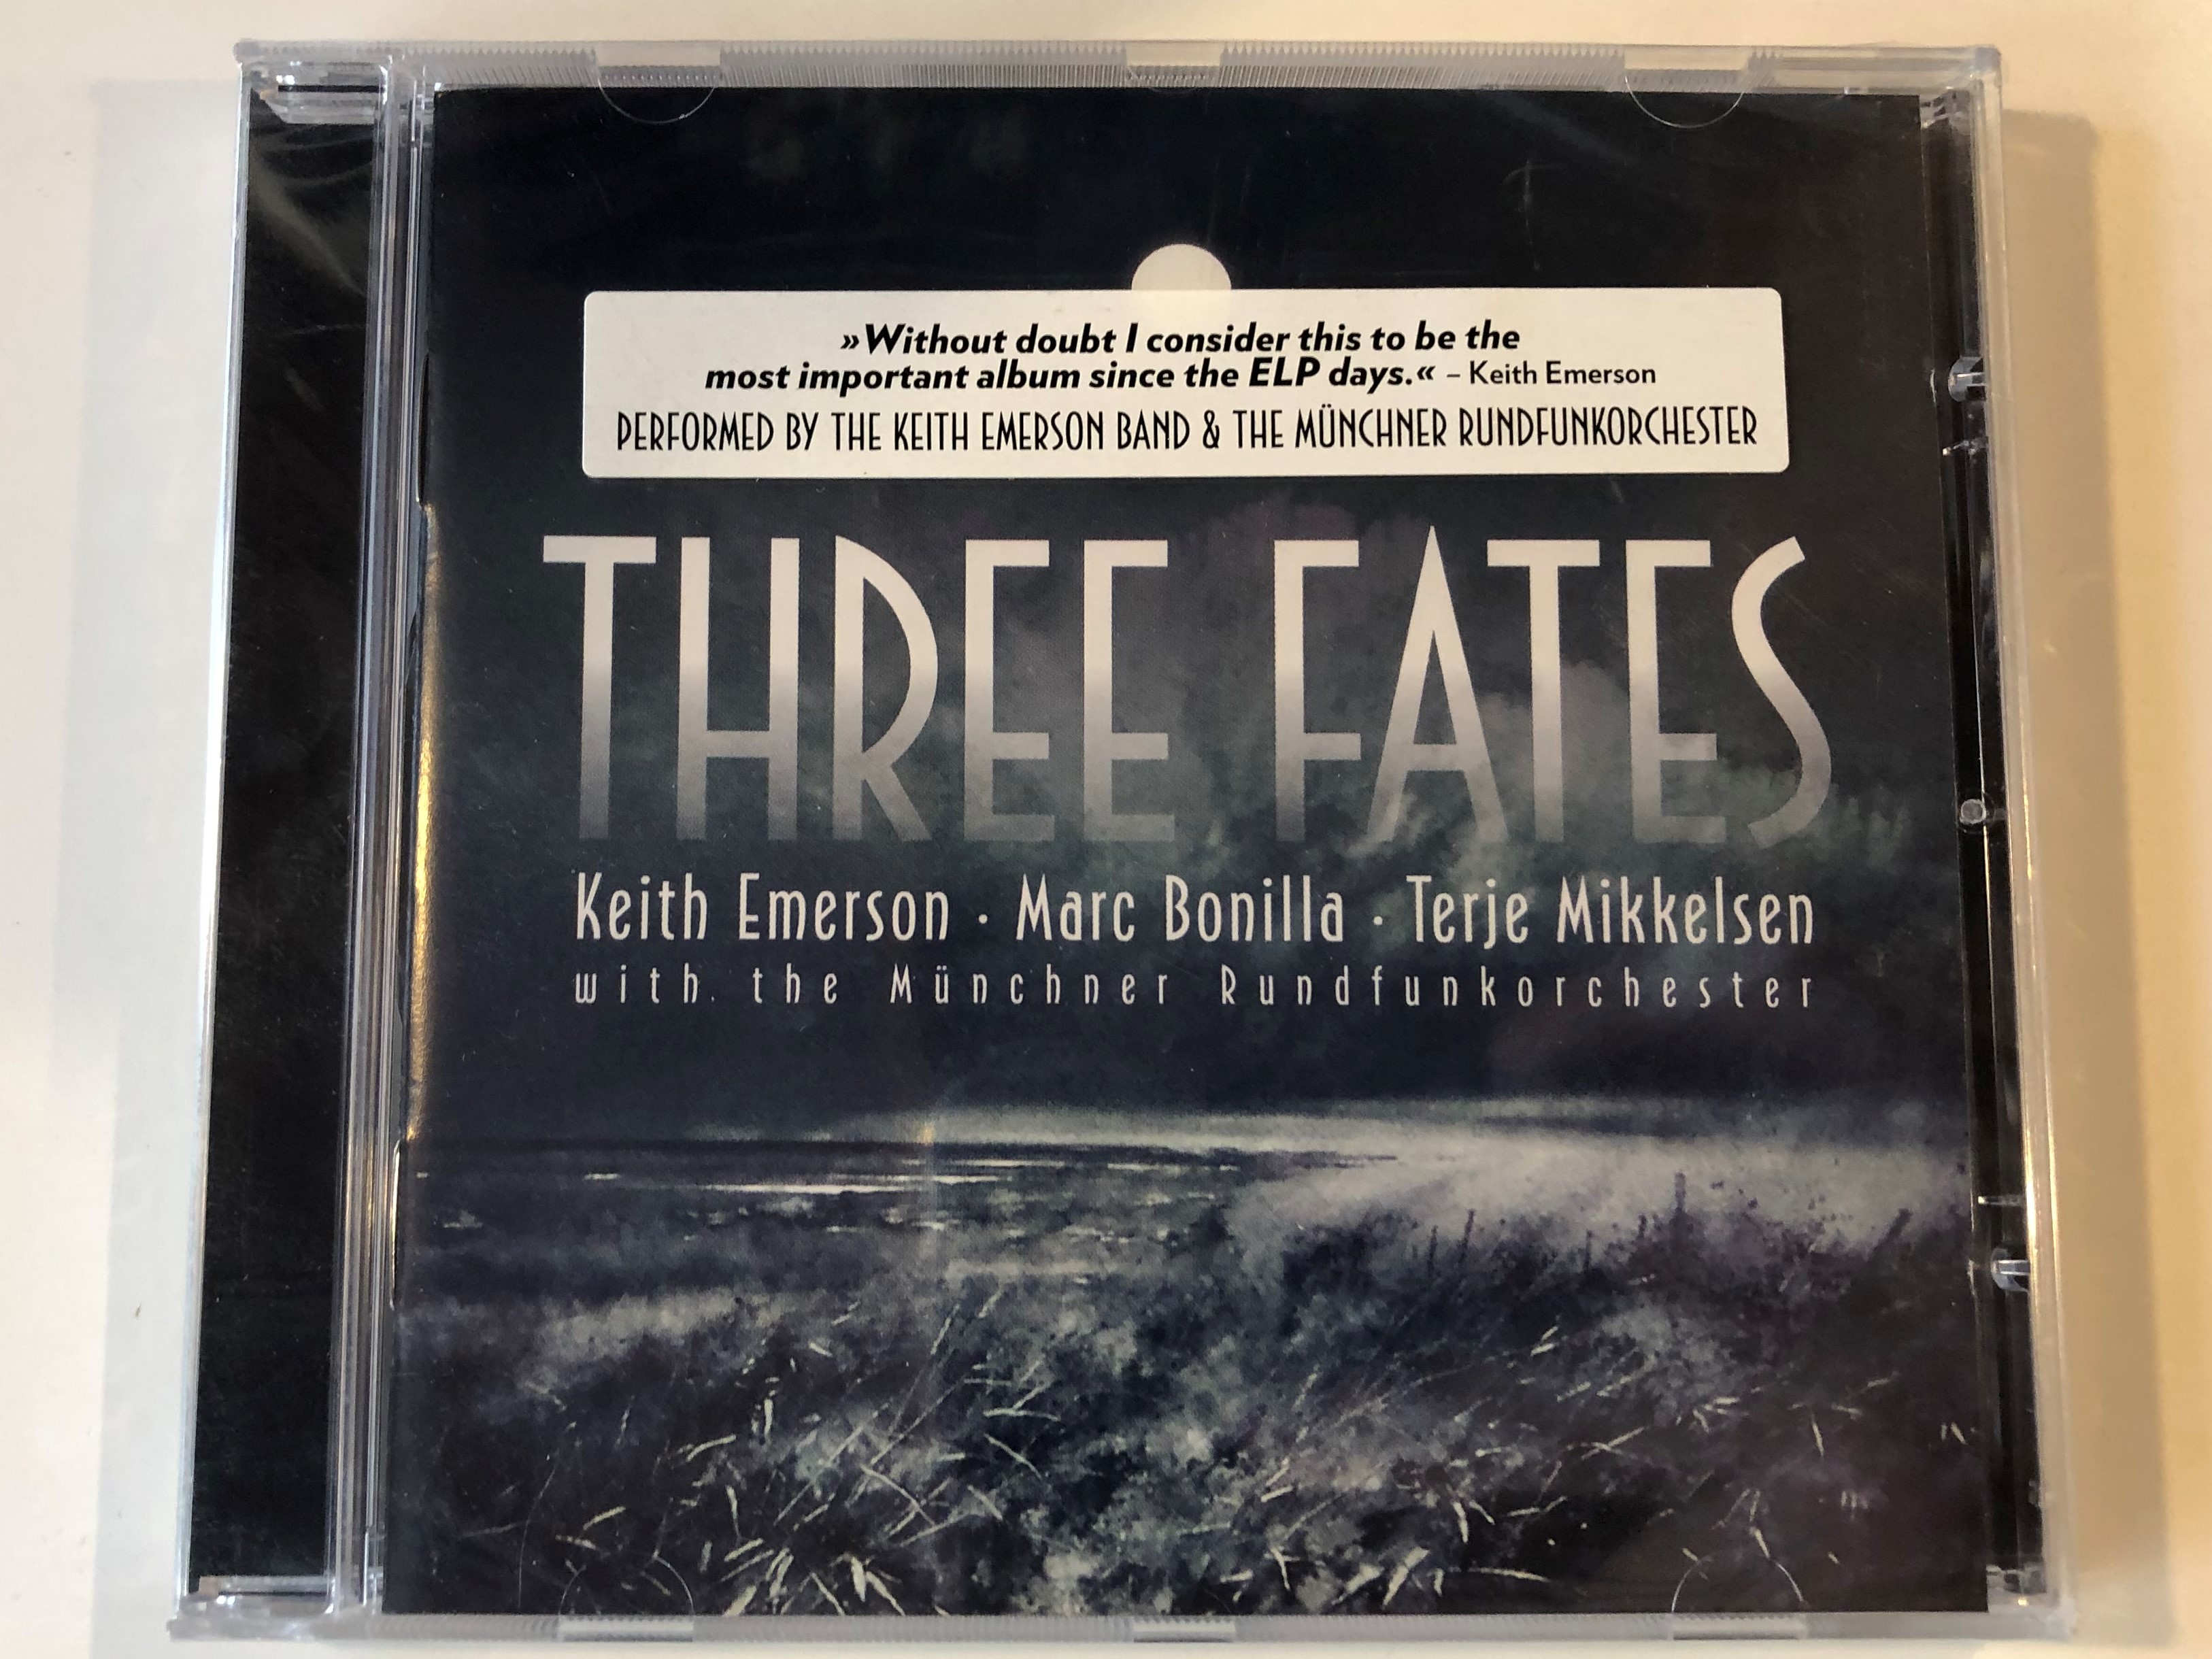 three-fates-keith-emerson-marc-bonilla-terje-mikkelsen-with-the-m-nchner-rundfunkorchester-performed-by-the-keith-emerson-band-the-m-nchner-rundfunkorchester-ear-music-audio-cd-2012-02-1-.jpg